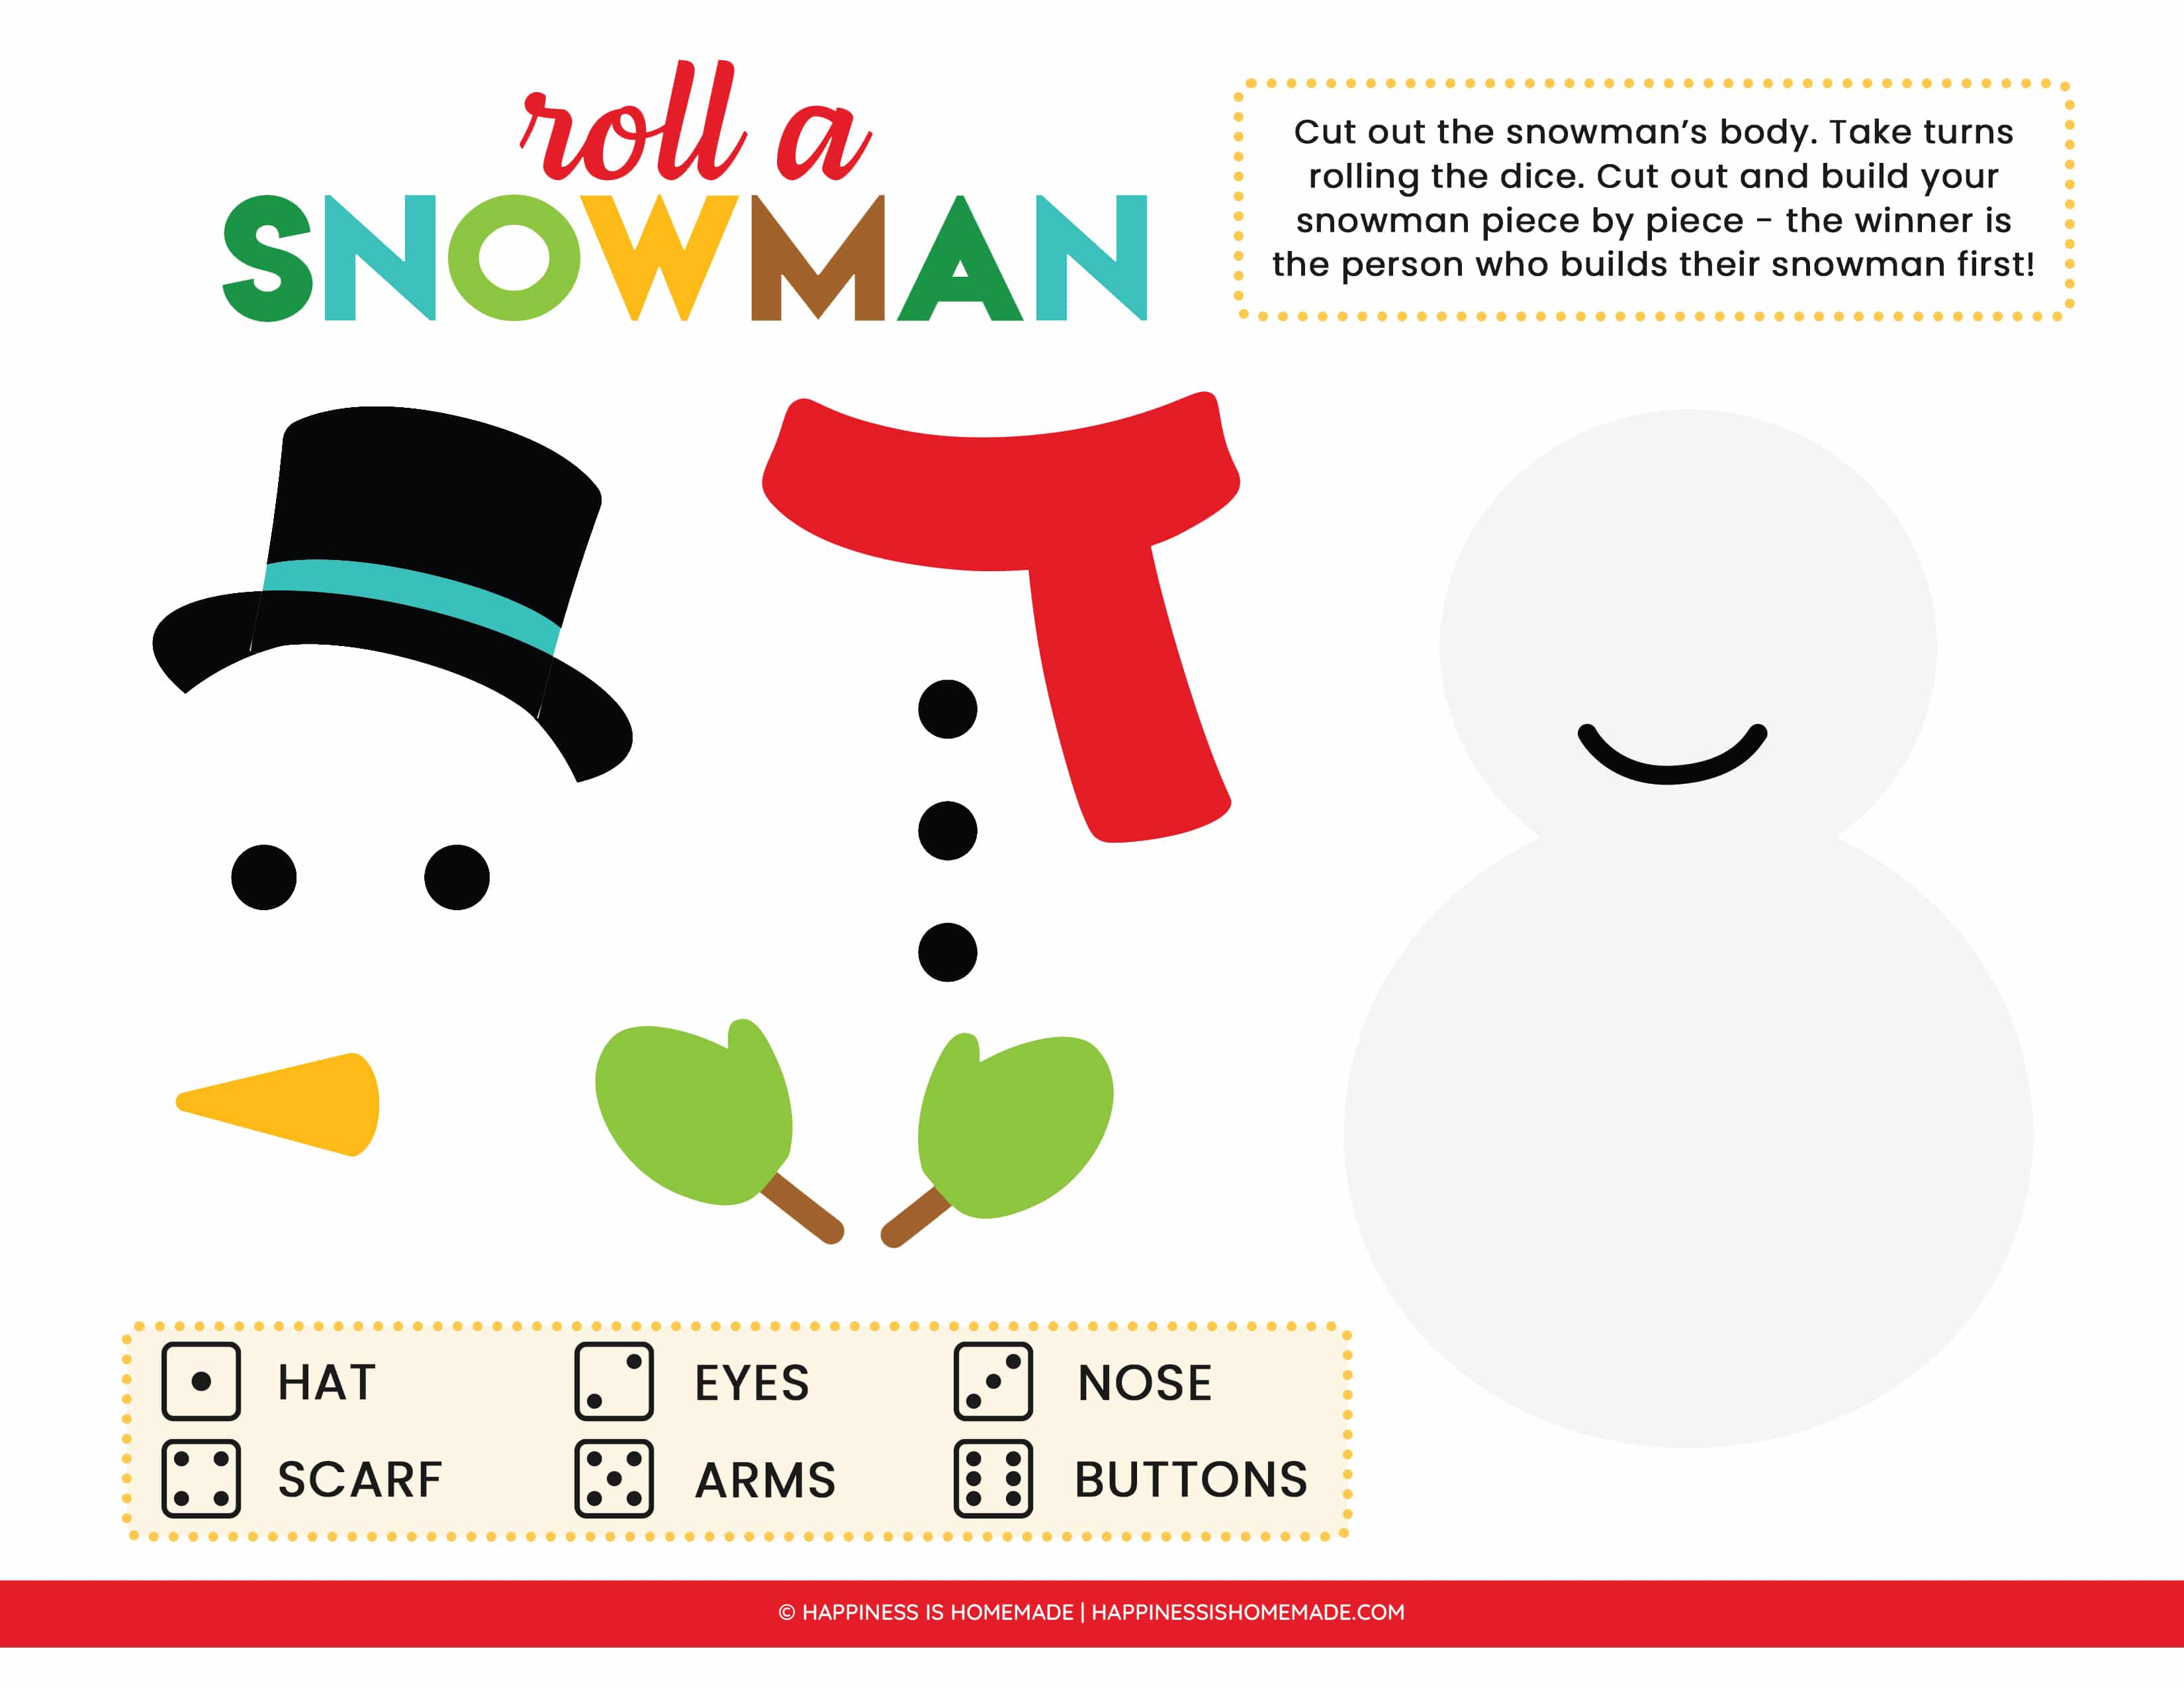 printable roll a snowman game with cut out instructions